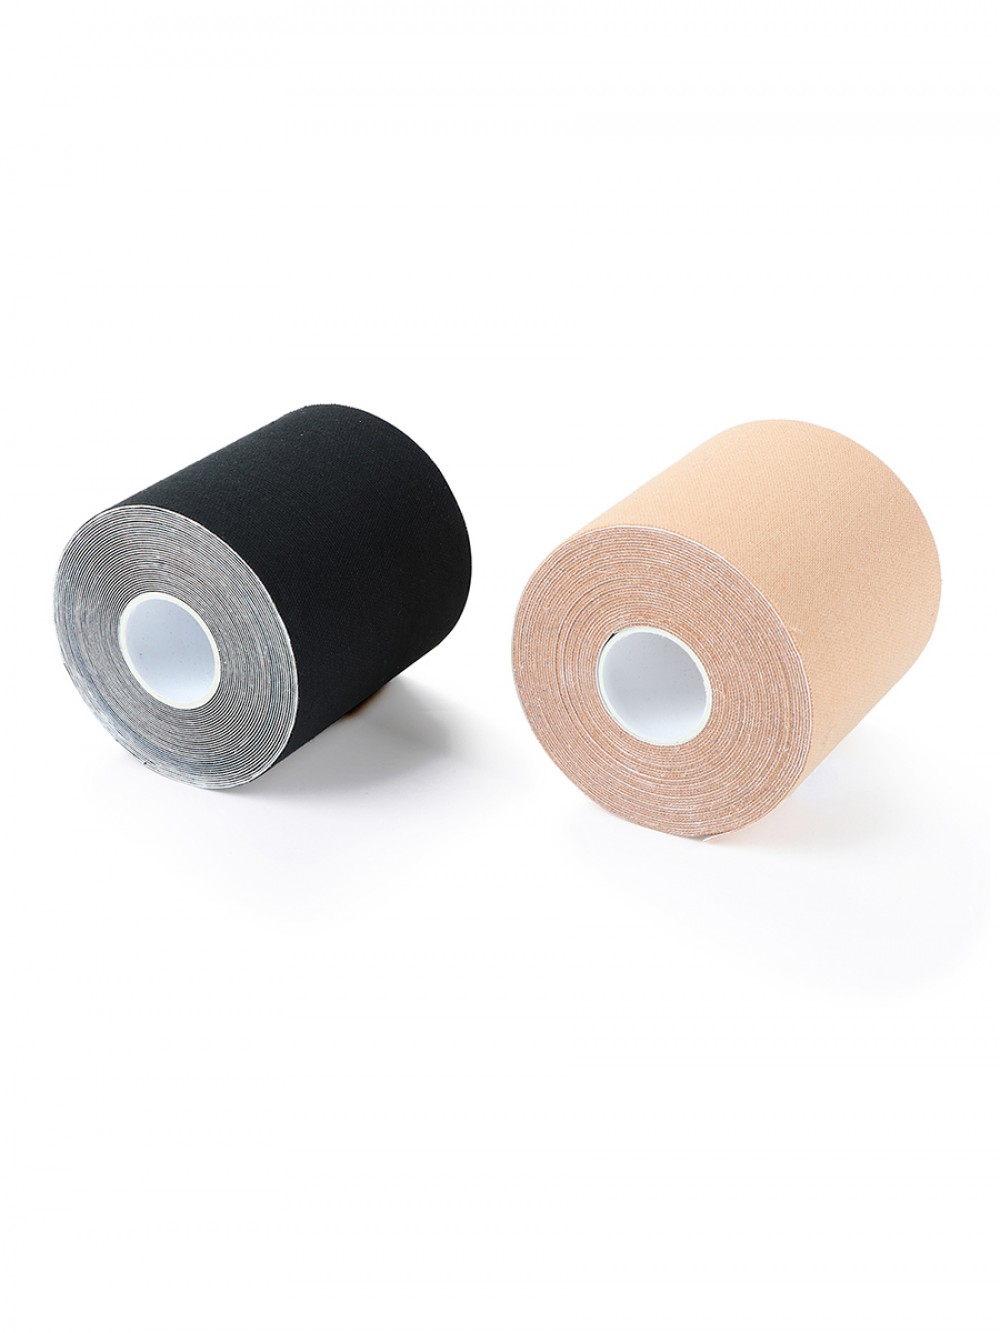 7.5cm/2.95inch Fabulous Fit Lift Up Invisible Bra Tape Roll Strapless Anti-Slip